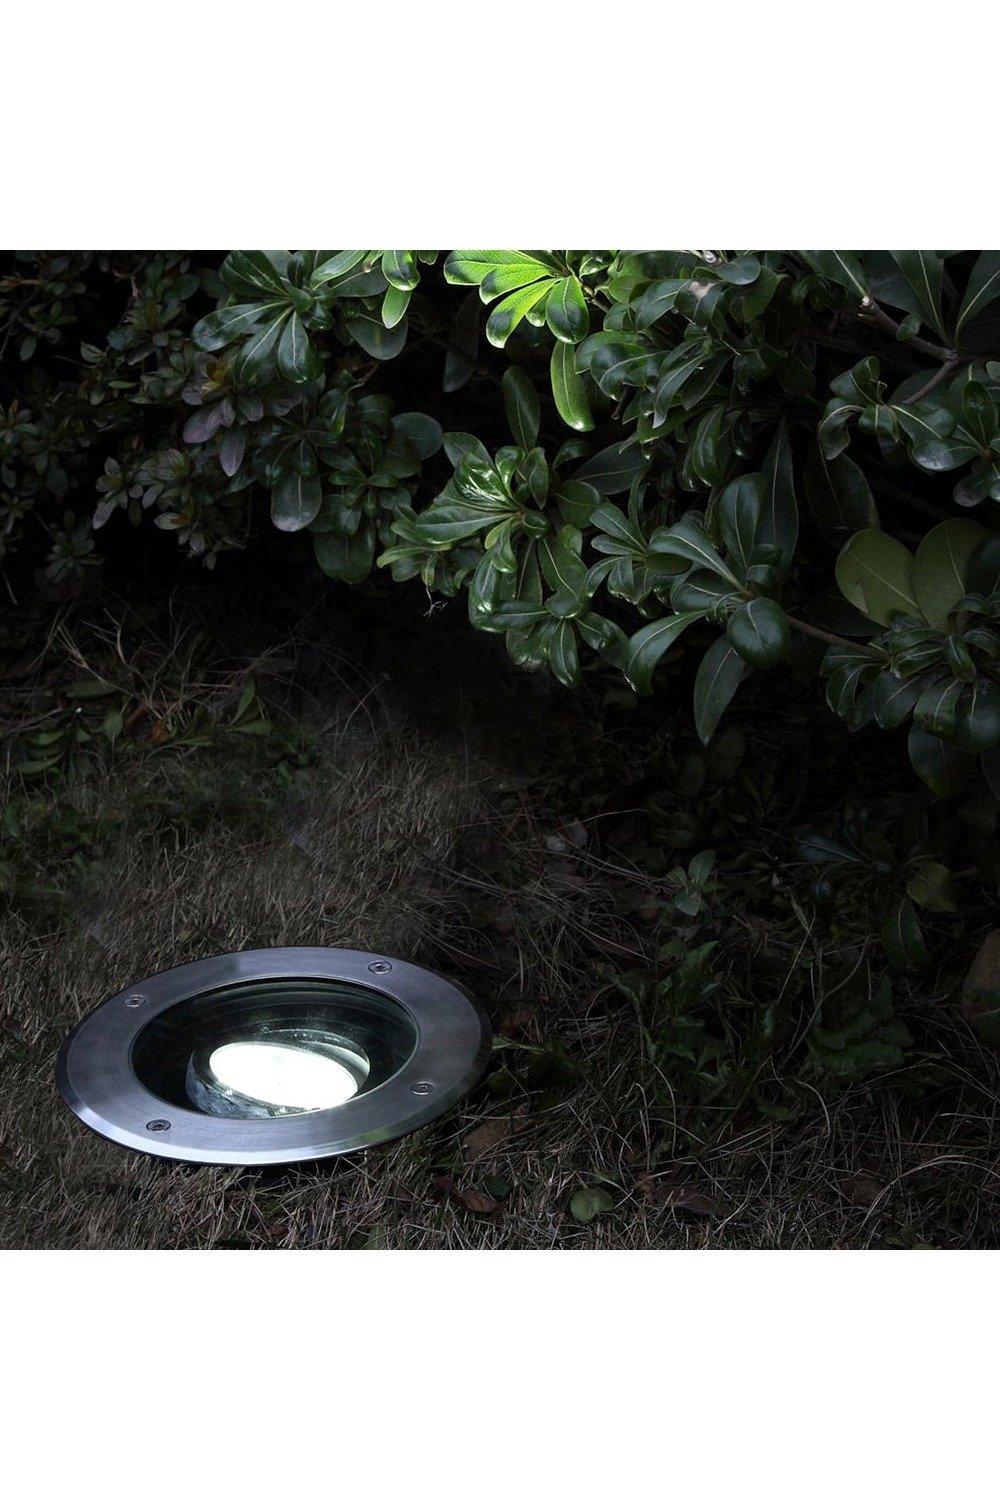 'Yara' Silver Angled Compact Recessed Outdoor Ground Light